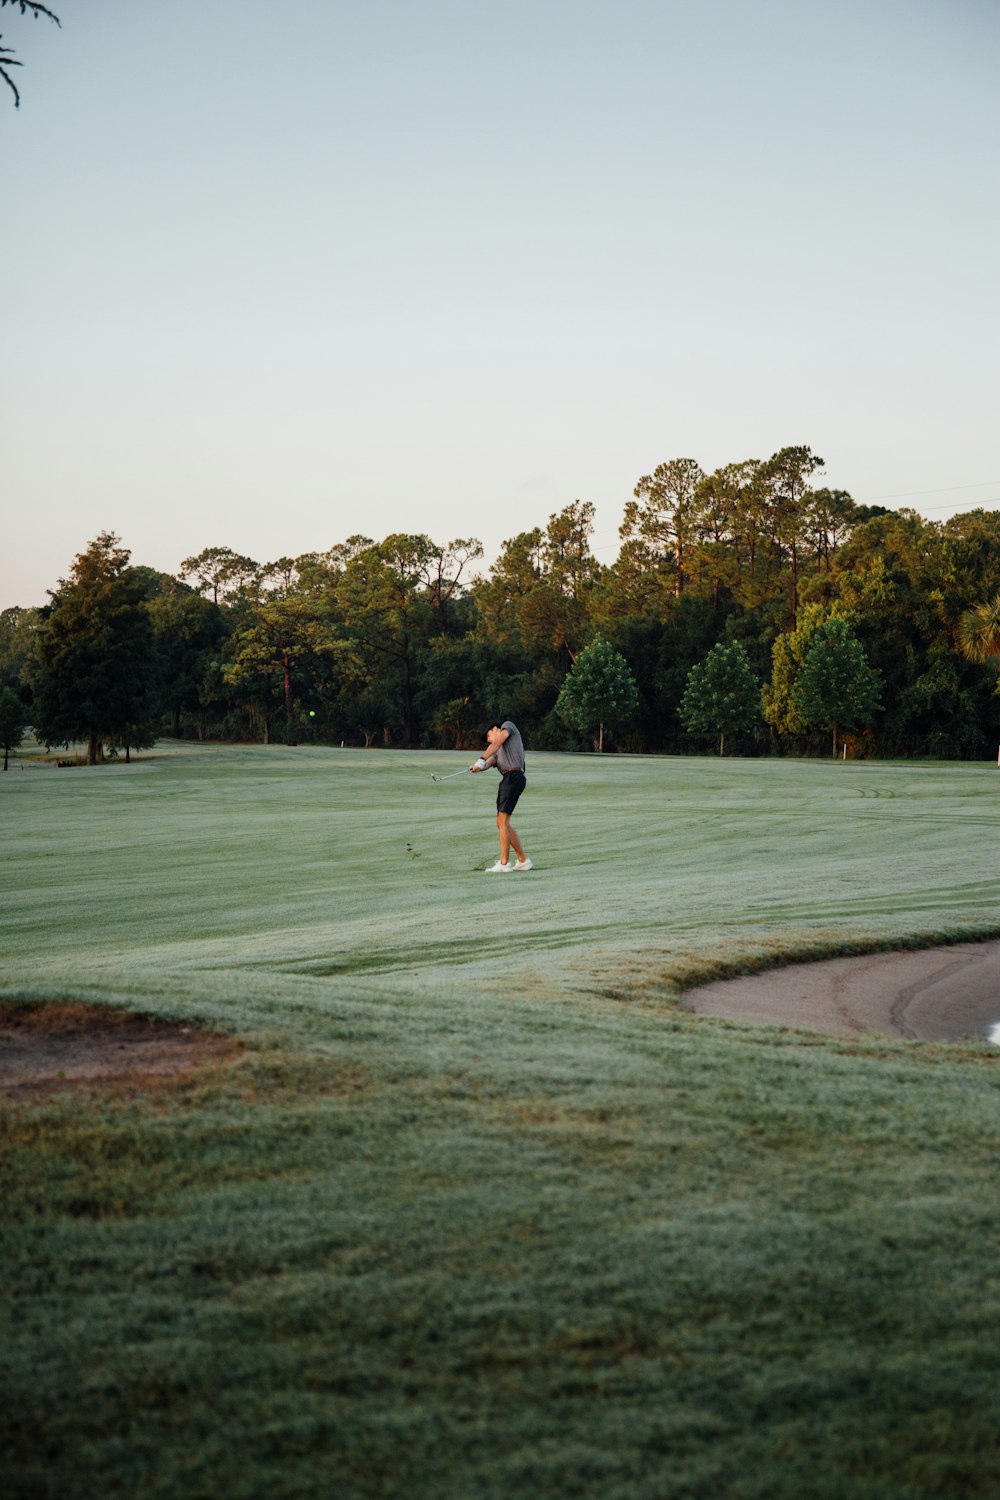 a man is playing golf on a golf course